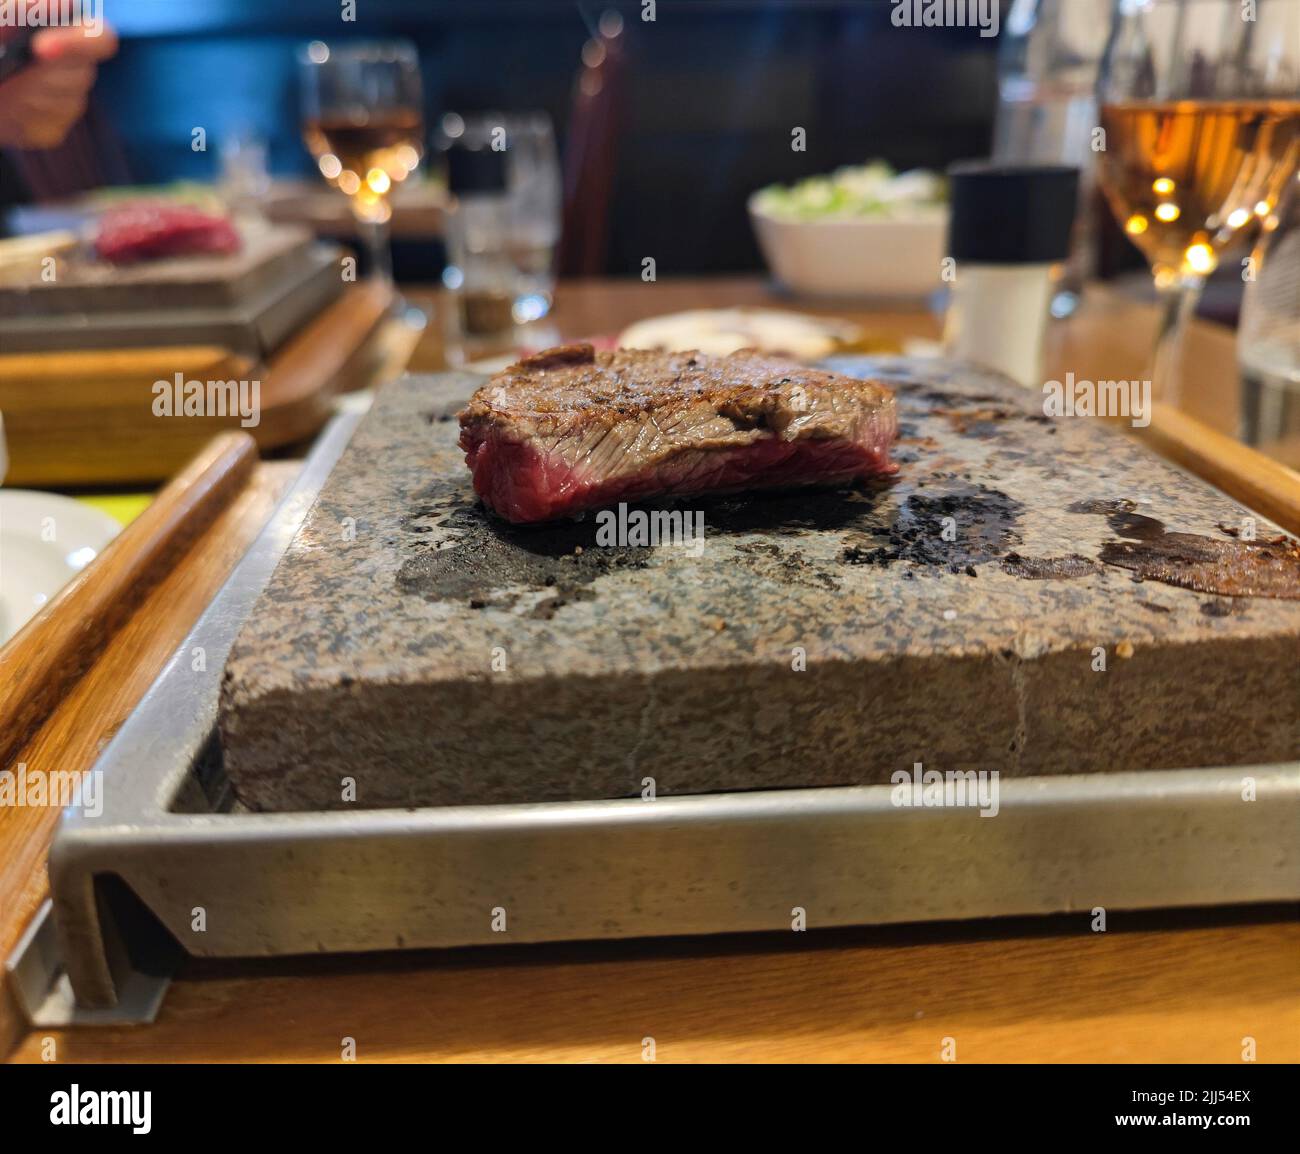 Steak is grilled on a stone grill with sauces in a restaurant on a dinner table Stock Photo